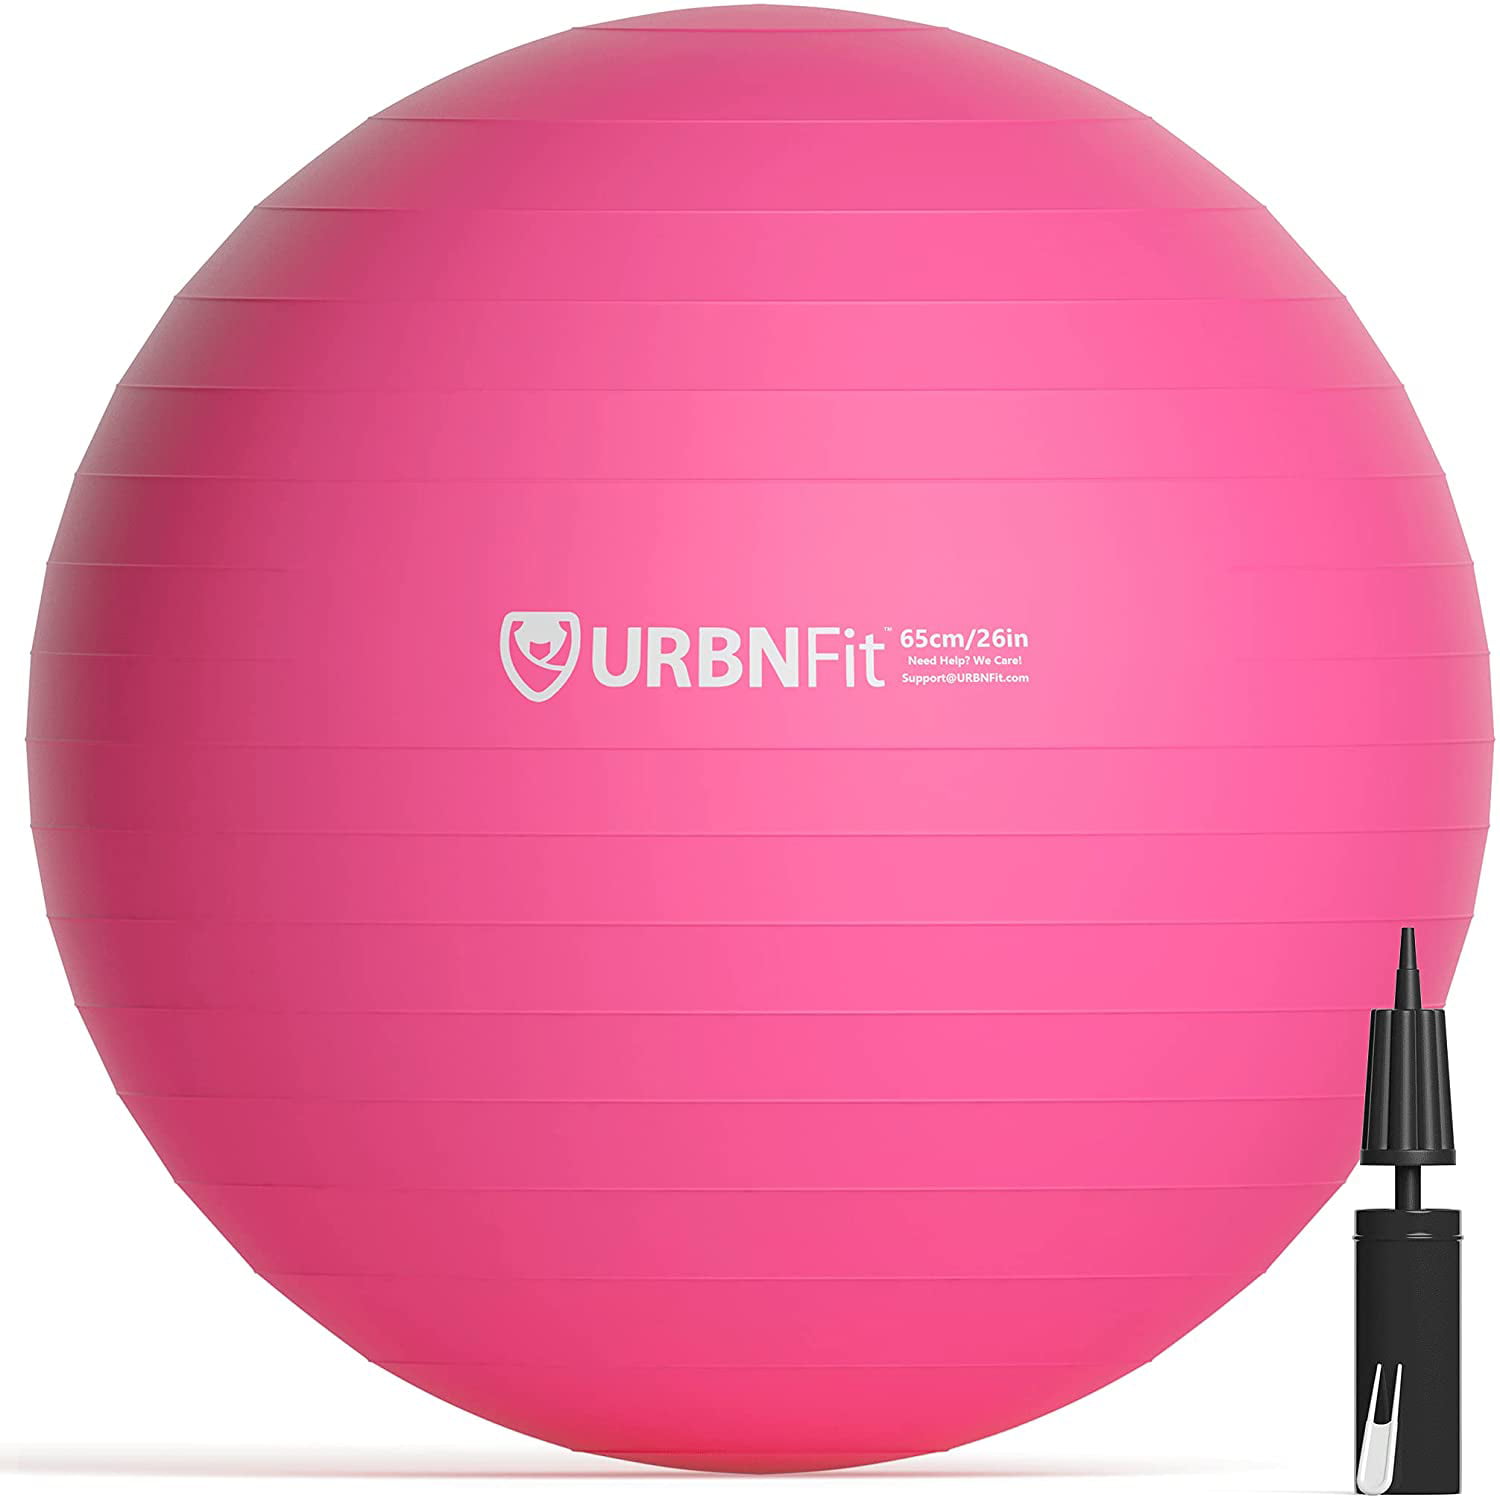 Fitness Ball Chair for Office URBNFit Exercise Ball AntiBurst Swiss Balance Ball w/ Pump Home Gym Yoga Ball for Workout Pregnancy Stability 